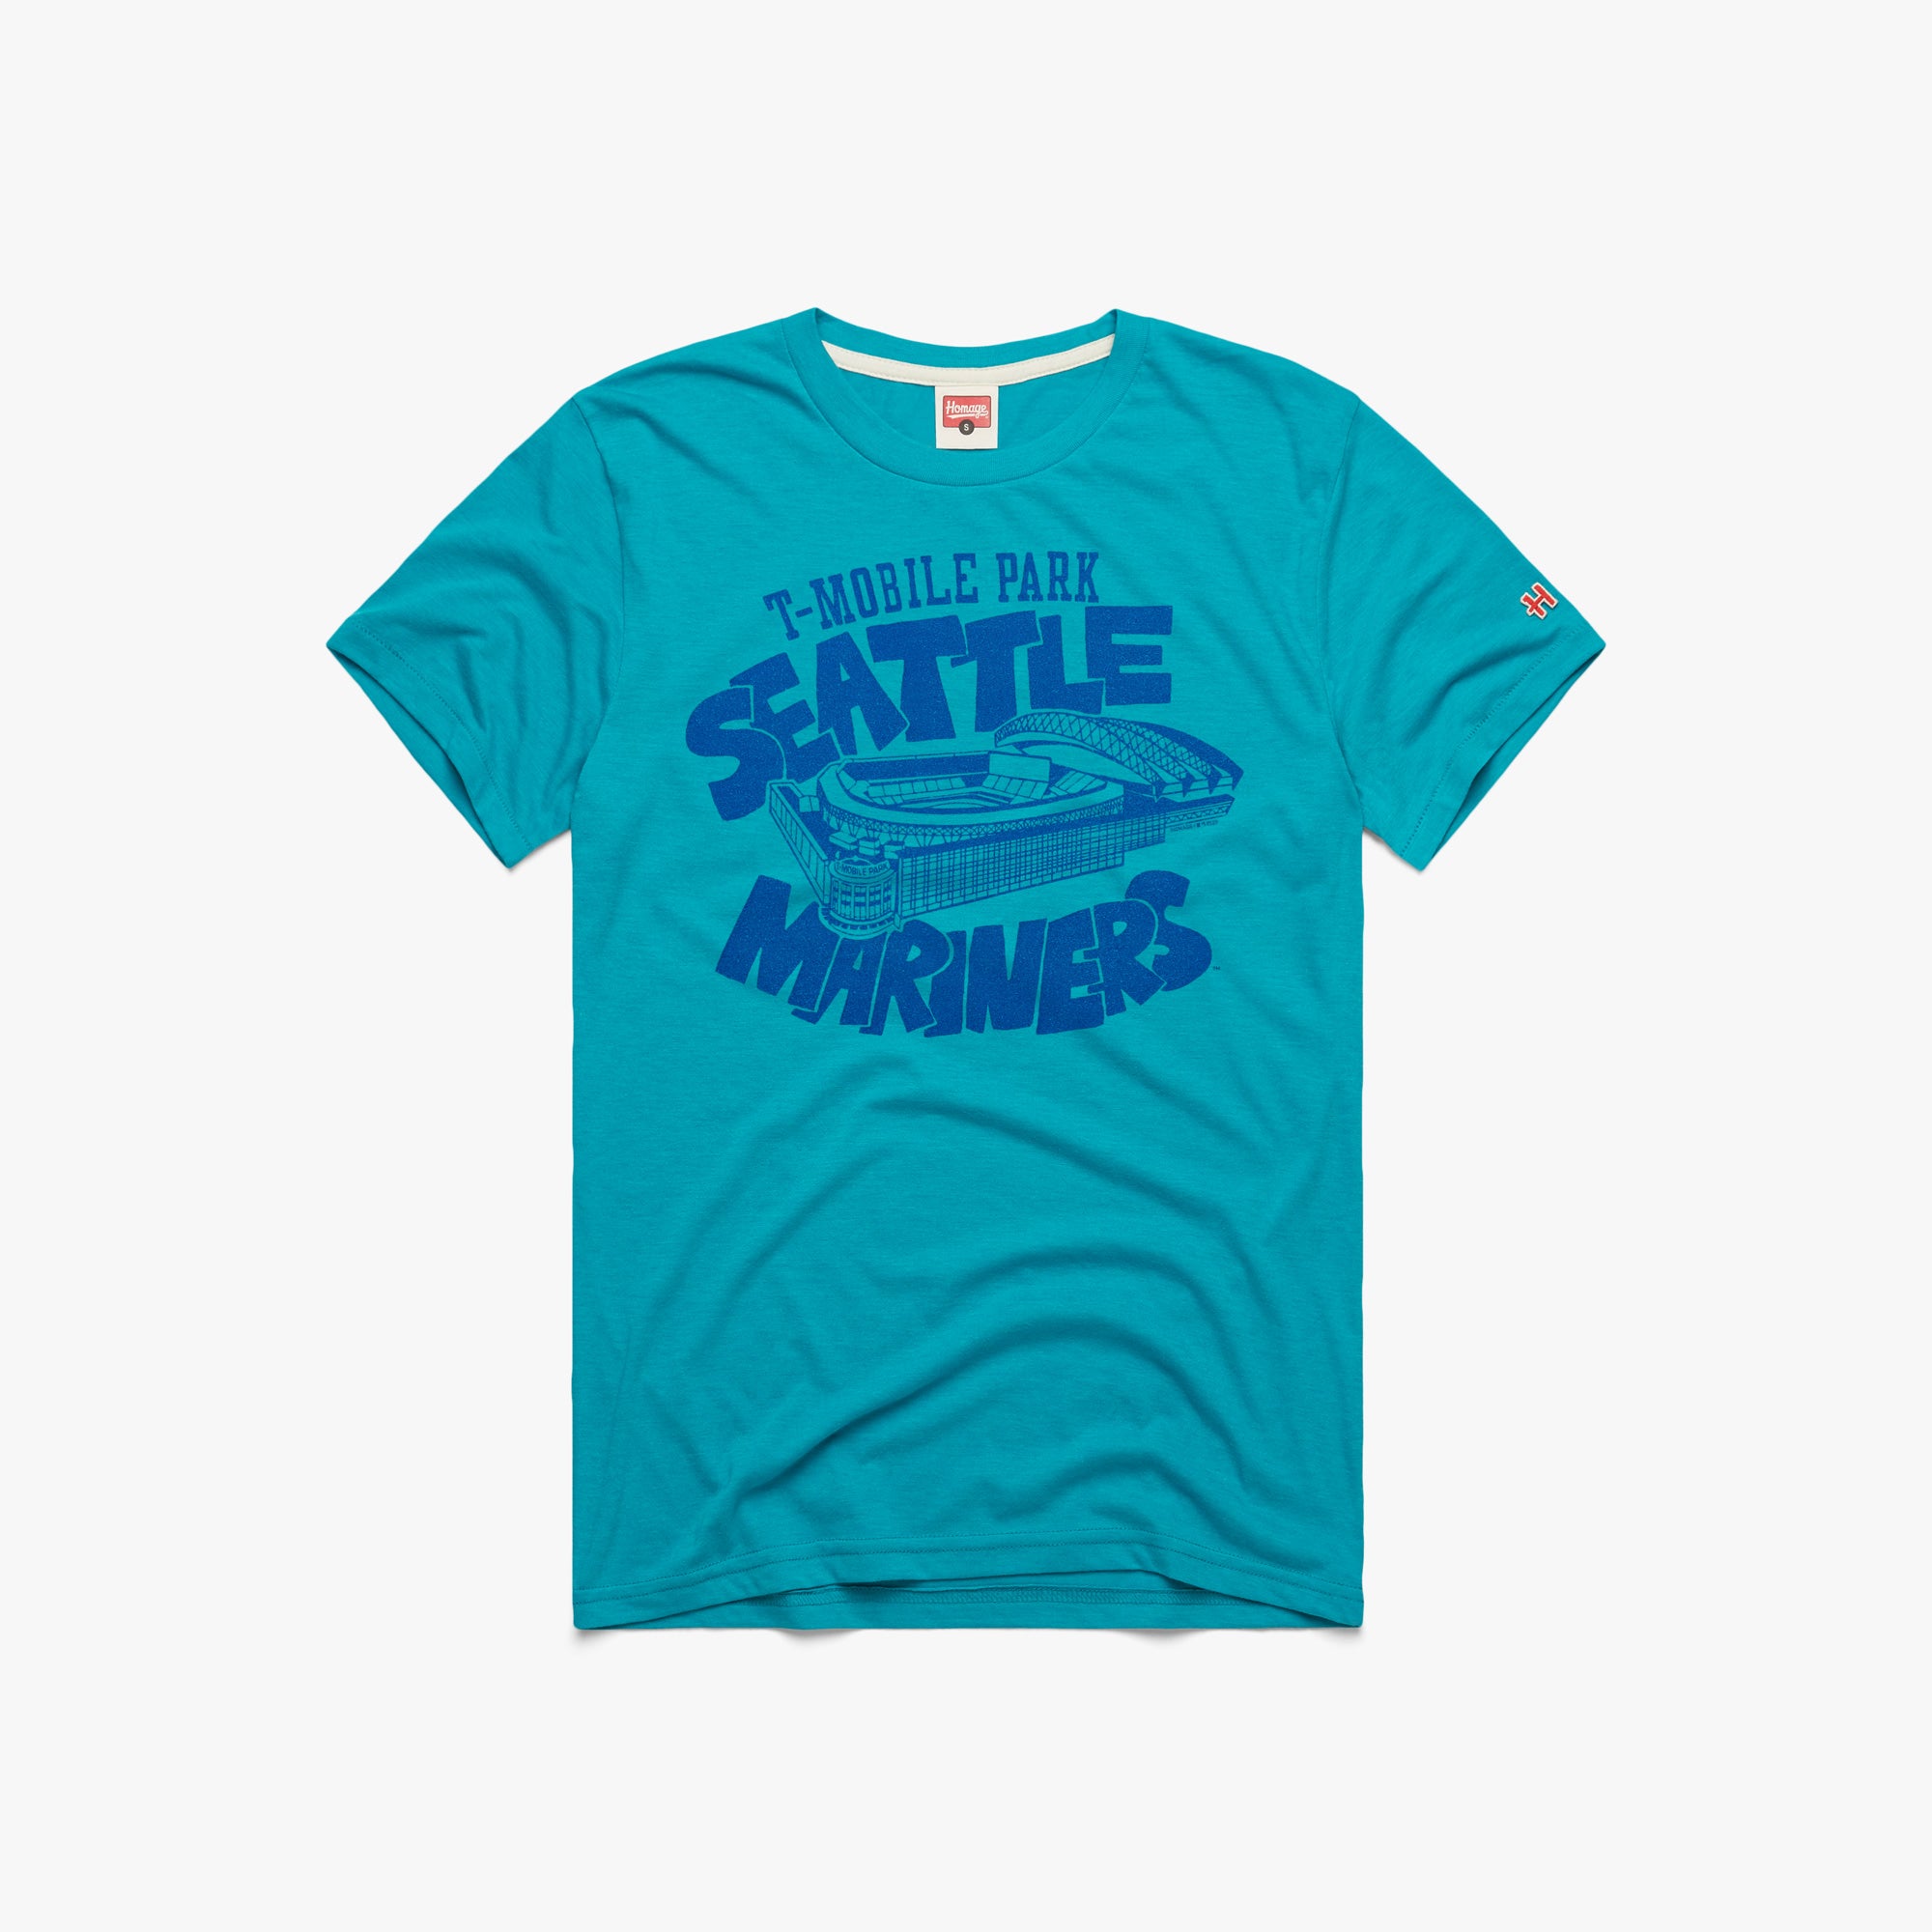 A look at Seattle Mariners merchandise